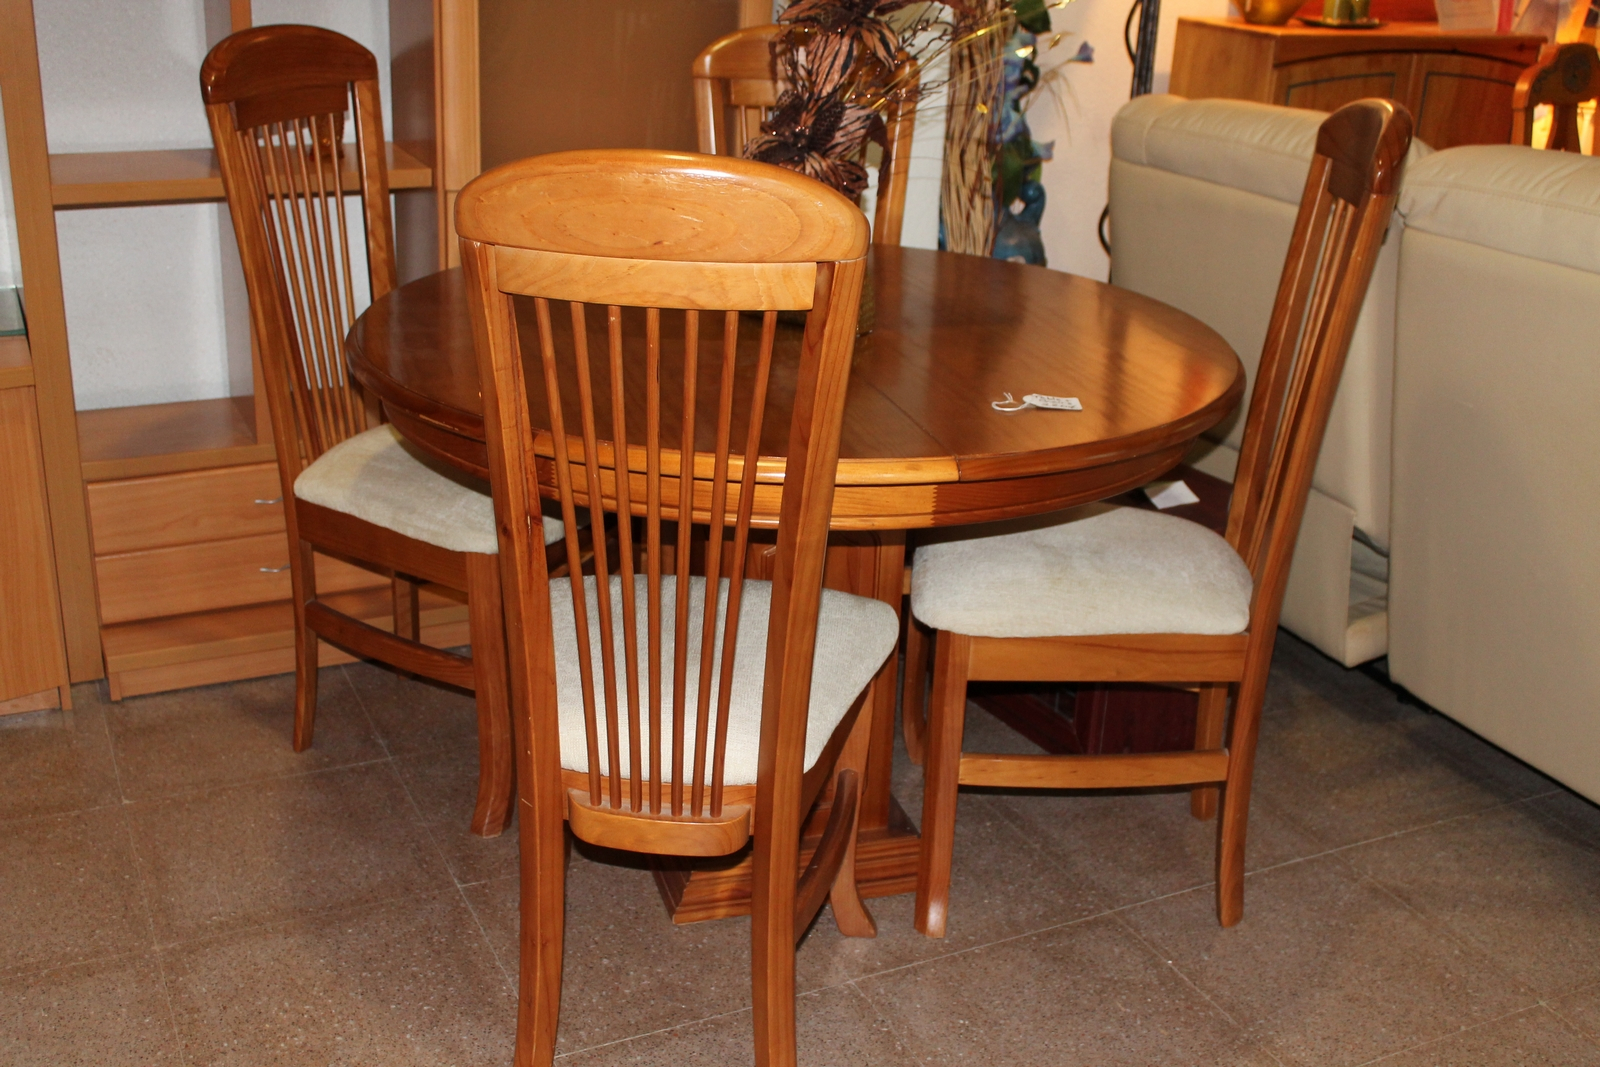 Looking For White Dining Room Chairs Second Hand